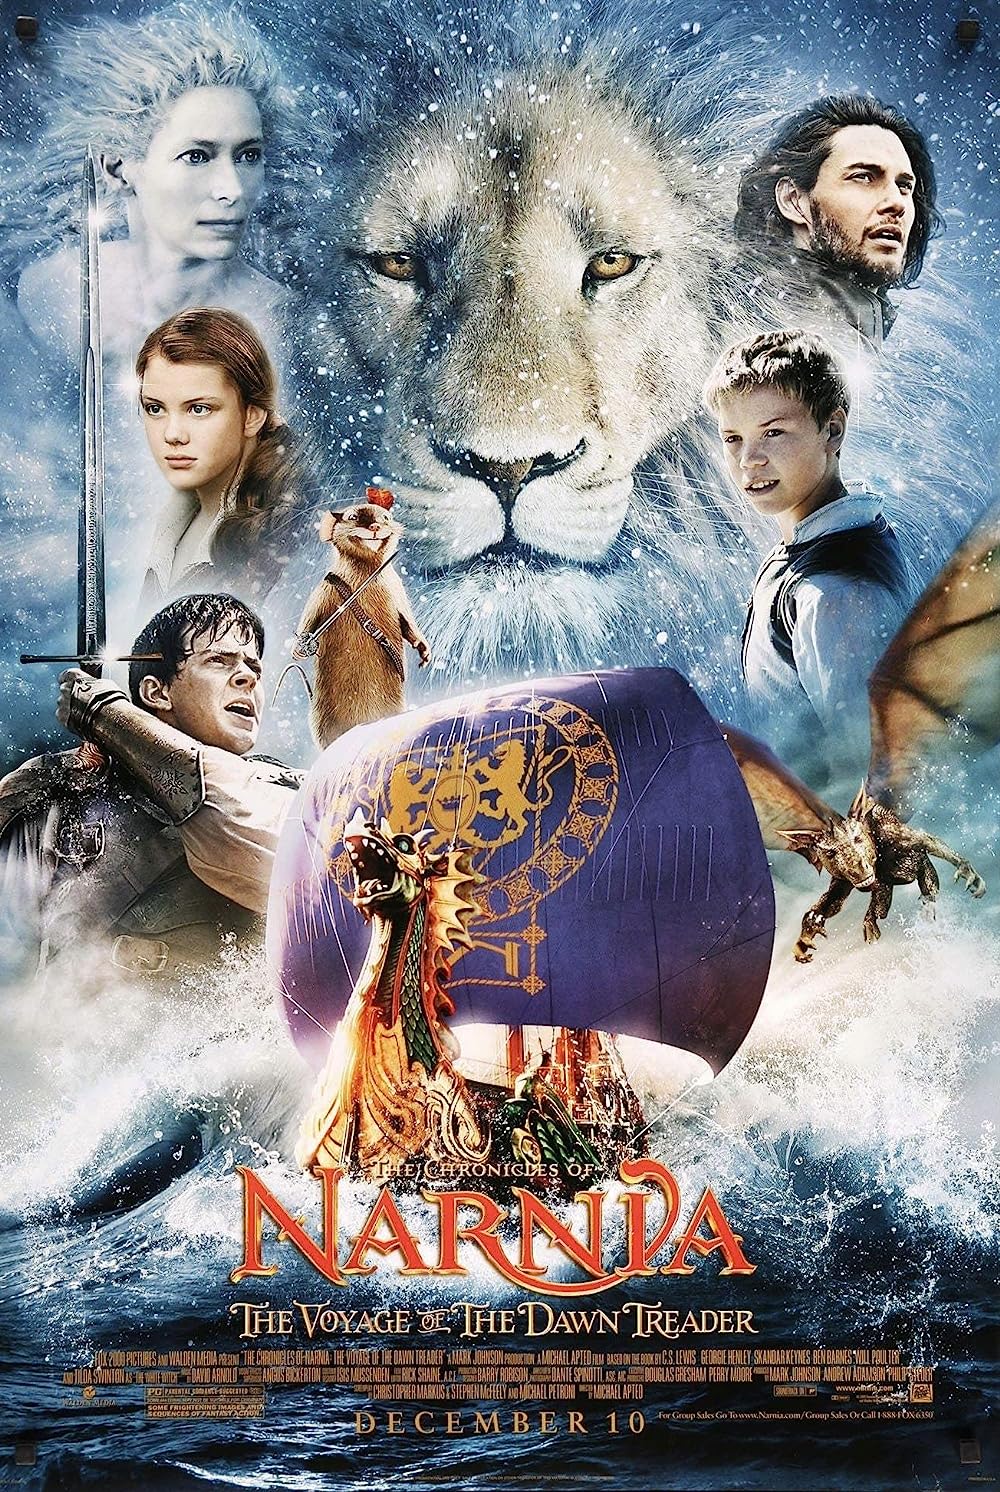 The Chronicles of Narnia The Voyage of the Dawn Treader 2010 Hindi Dual Audio 480p BluRay 400MB ESub Download